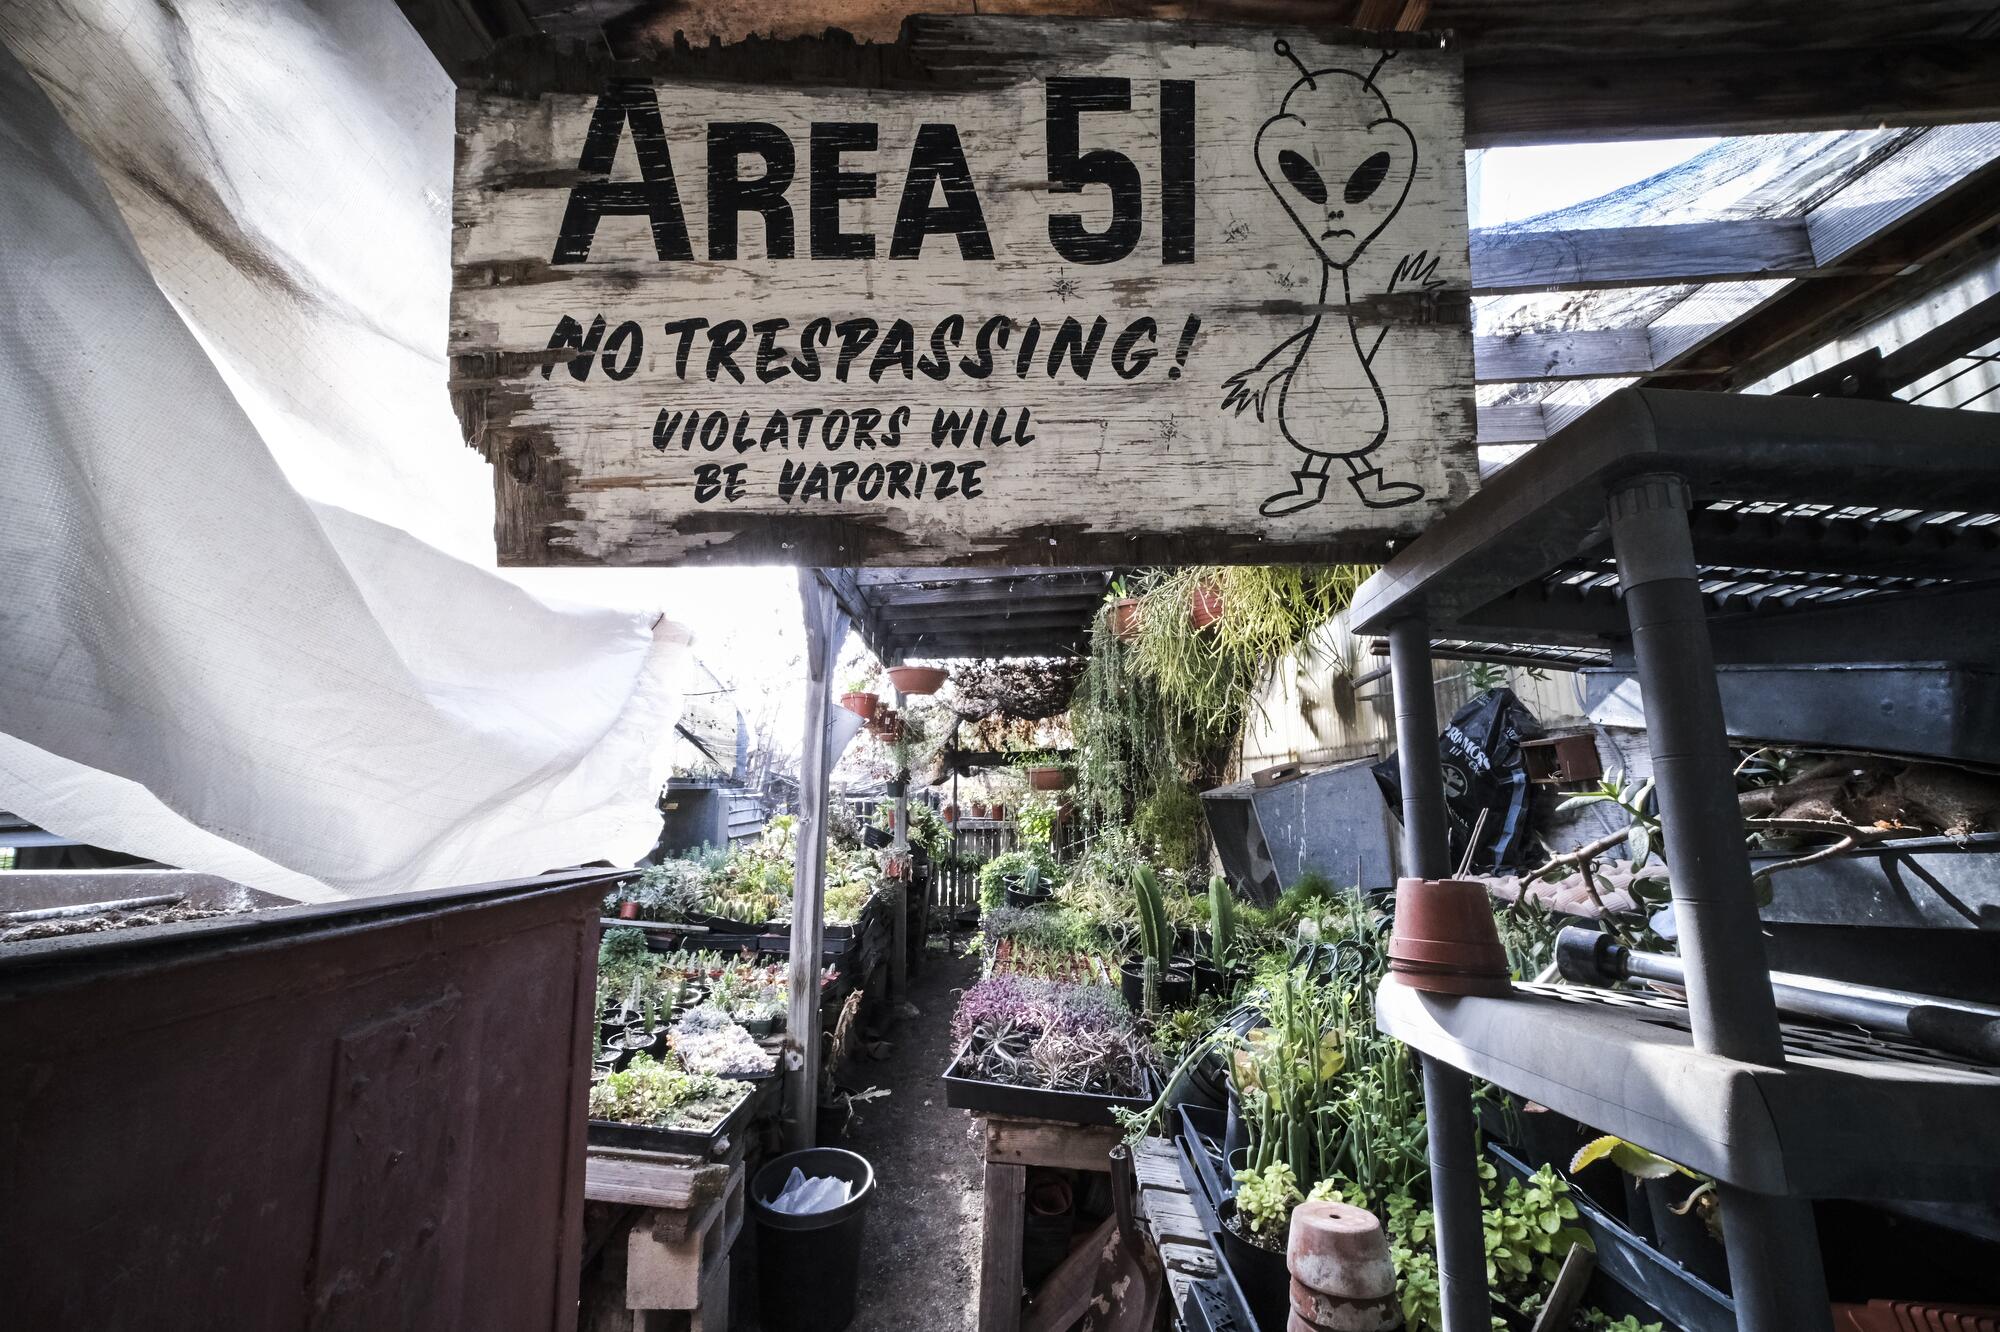 A humorous sign warns people against trespassing in "Area 51" of the Cactus Ranch.